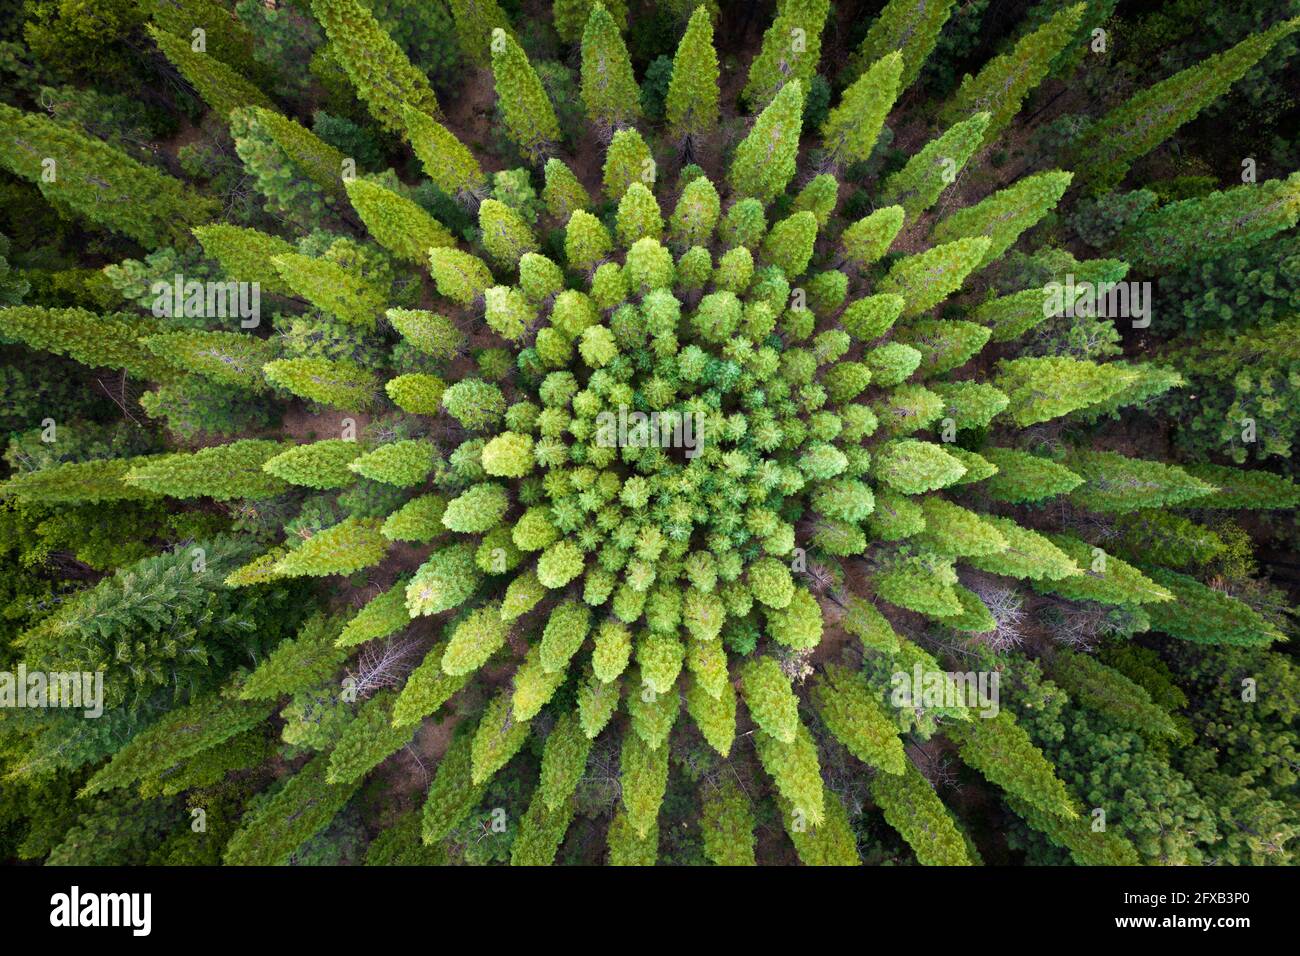 Amazing and unique tree circle in a California pine forest. Stock Photo